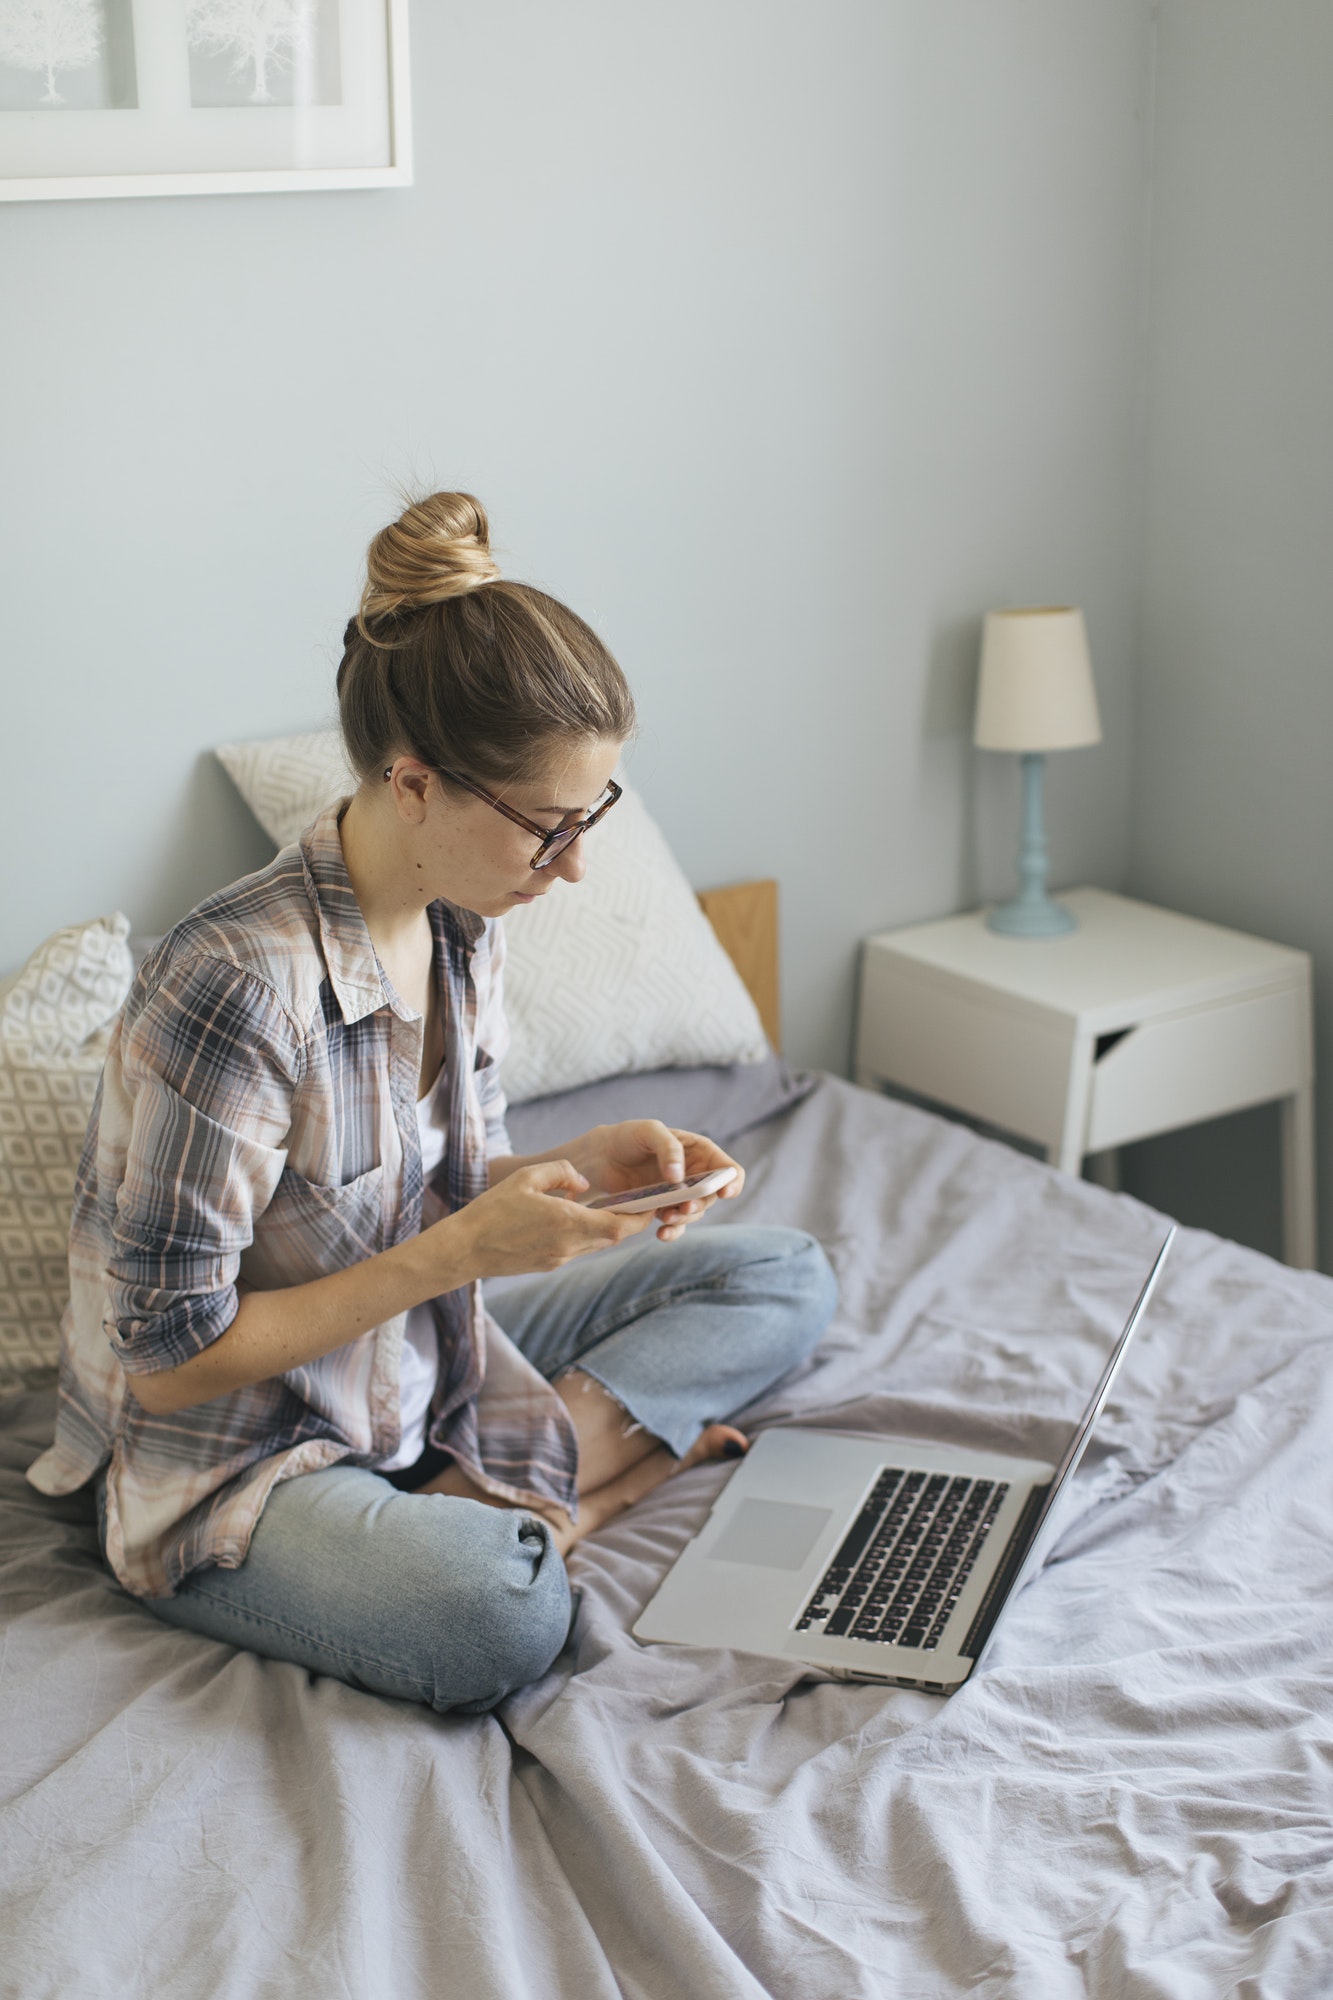 Woman sat with laptop on bed, working from home using phone